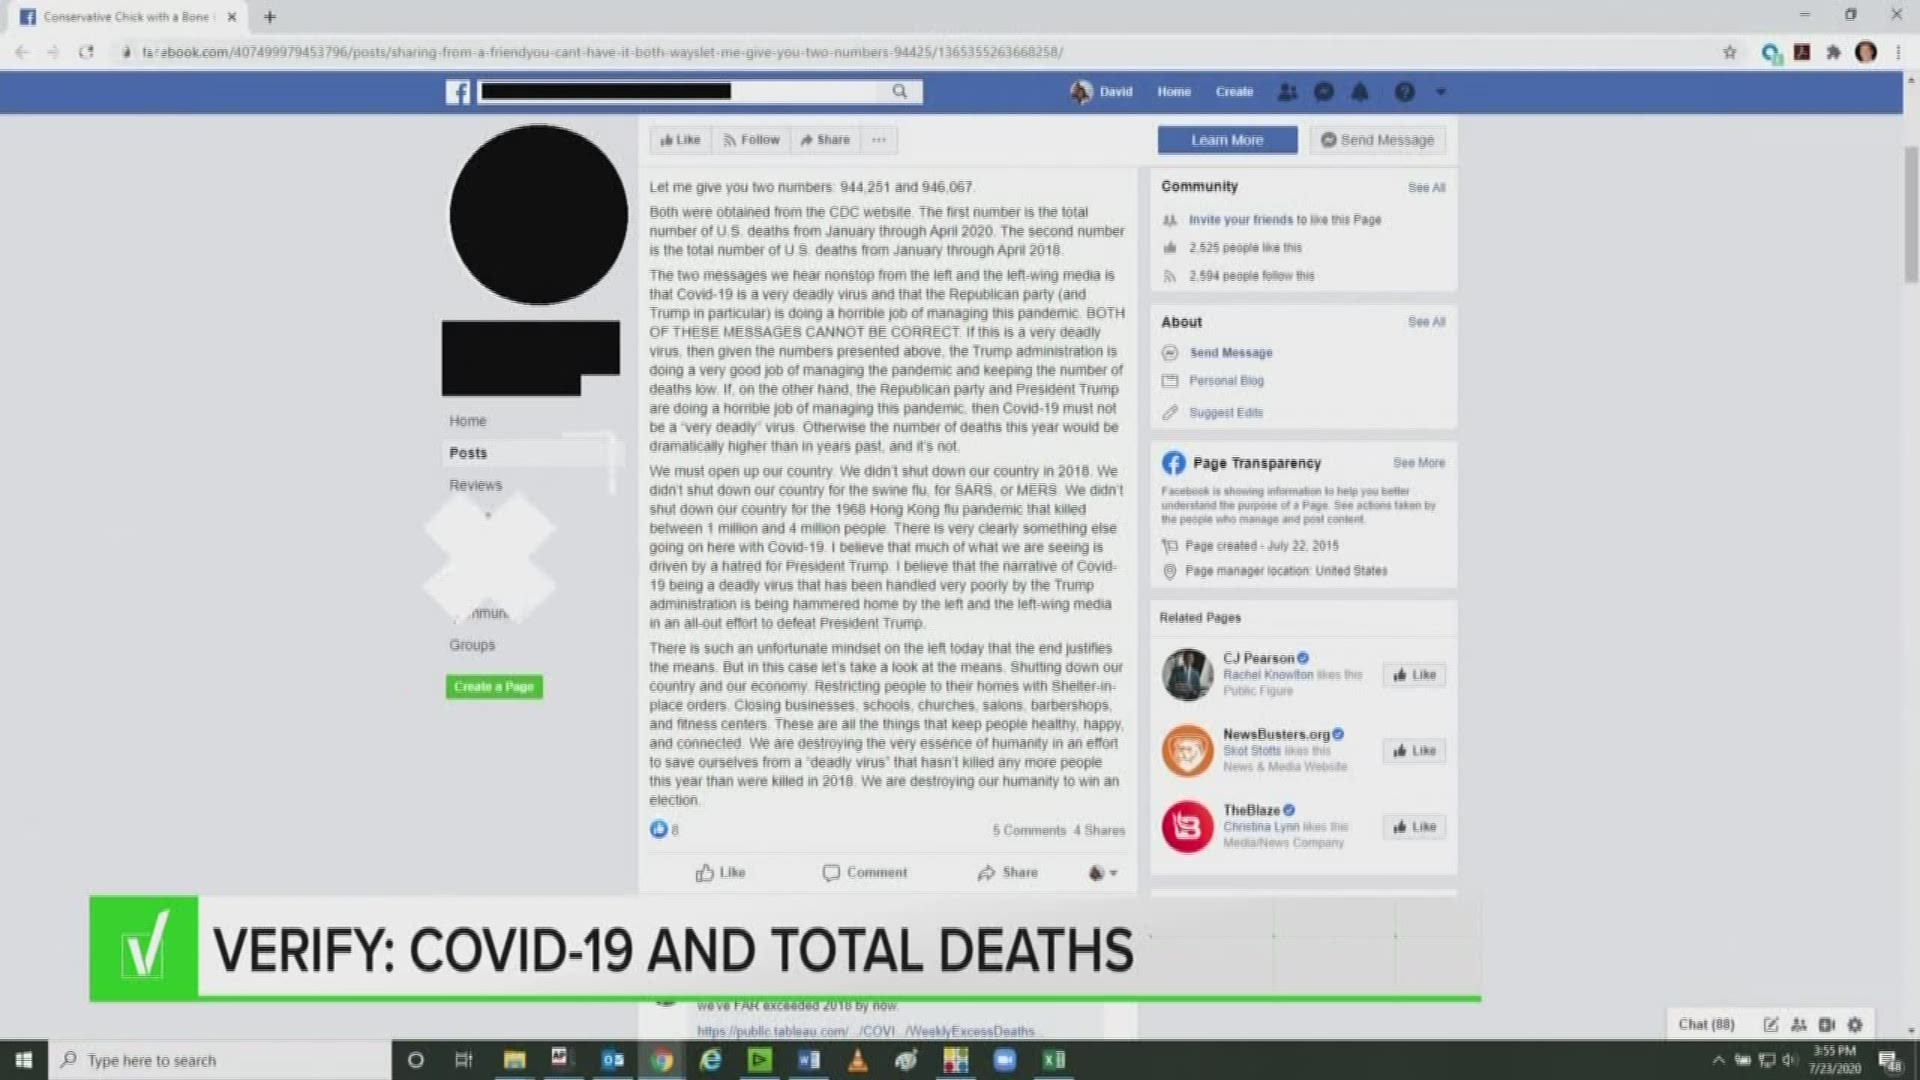 An oft-shared Facebook post claims that the number of total deaths in the country was similar in 2018 and 2020, casting doubt on the impact of the novel coronavirus.